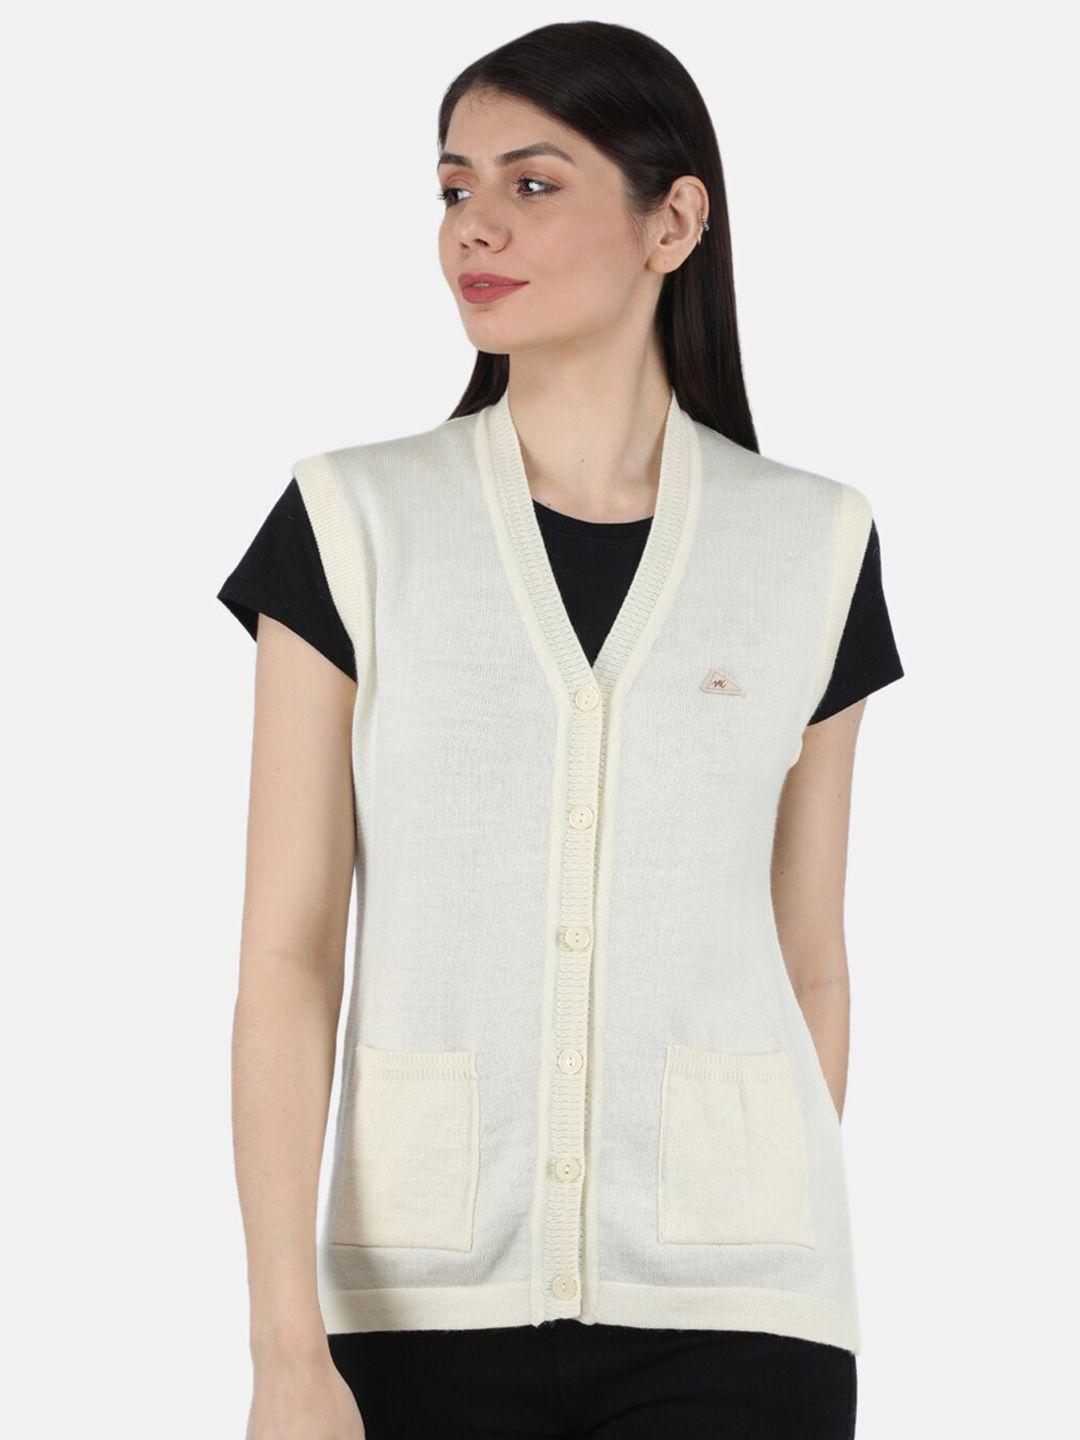 monte carlo women off white solid v-neck pure wool cardigan